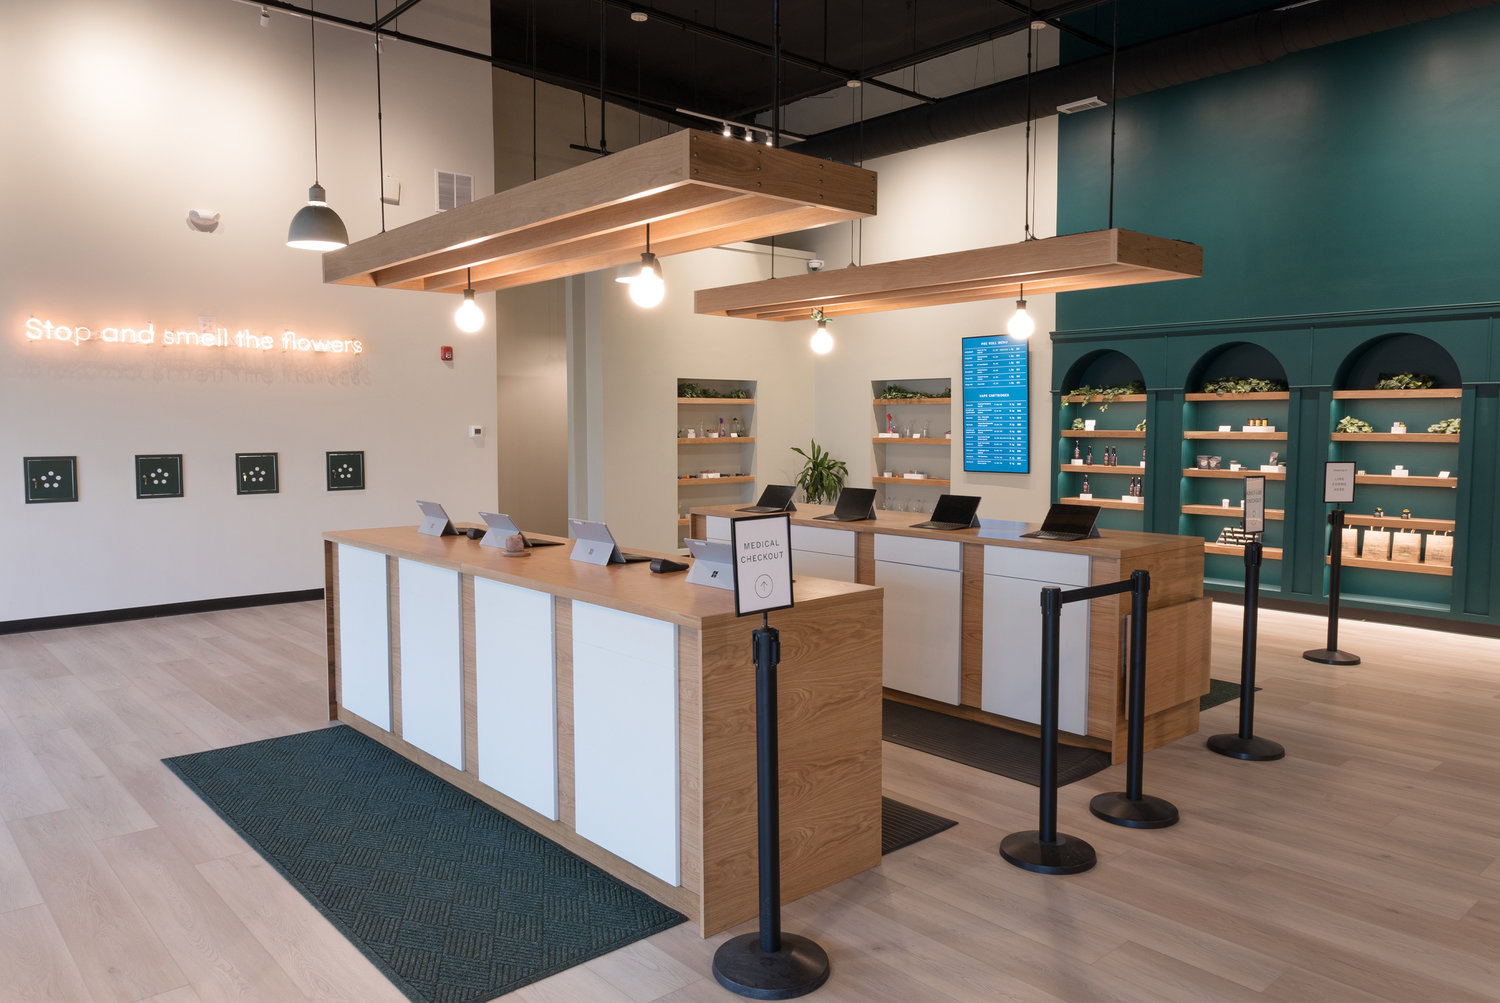 A look inside Exeter dispensary Sweetspot